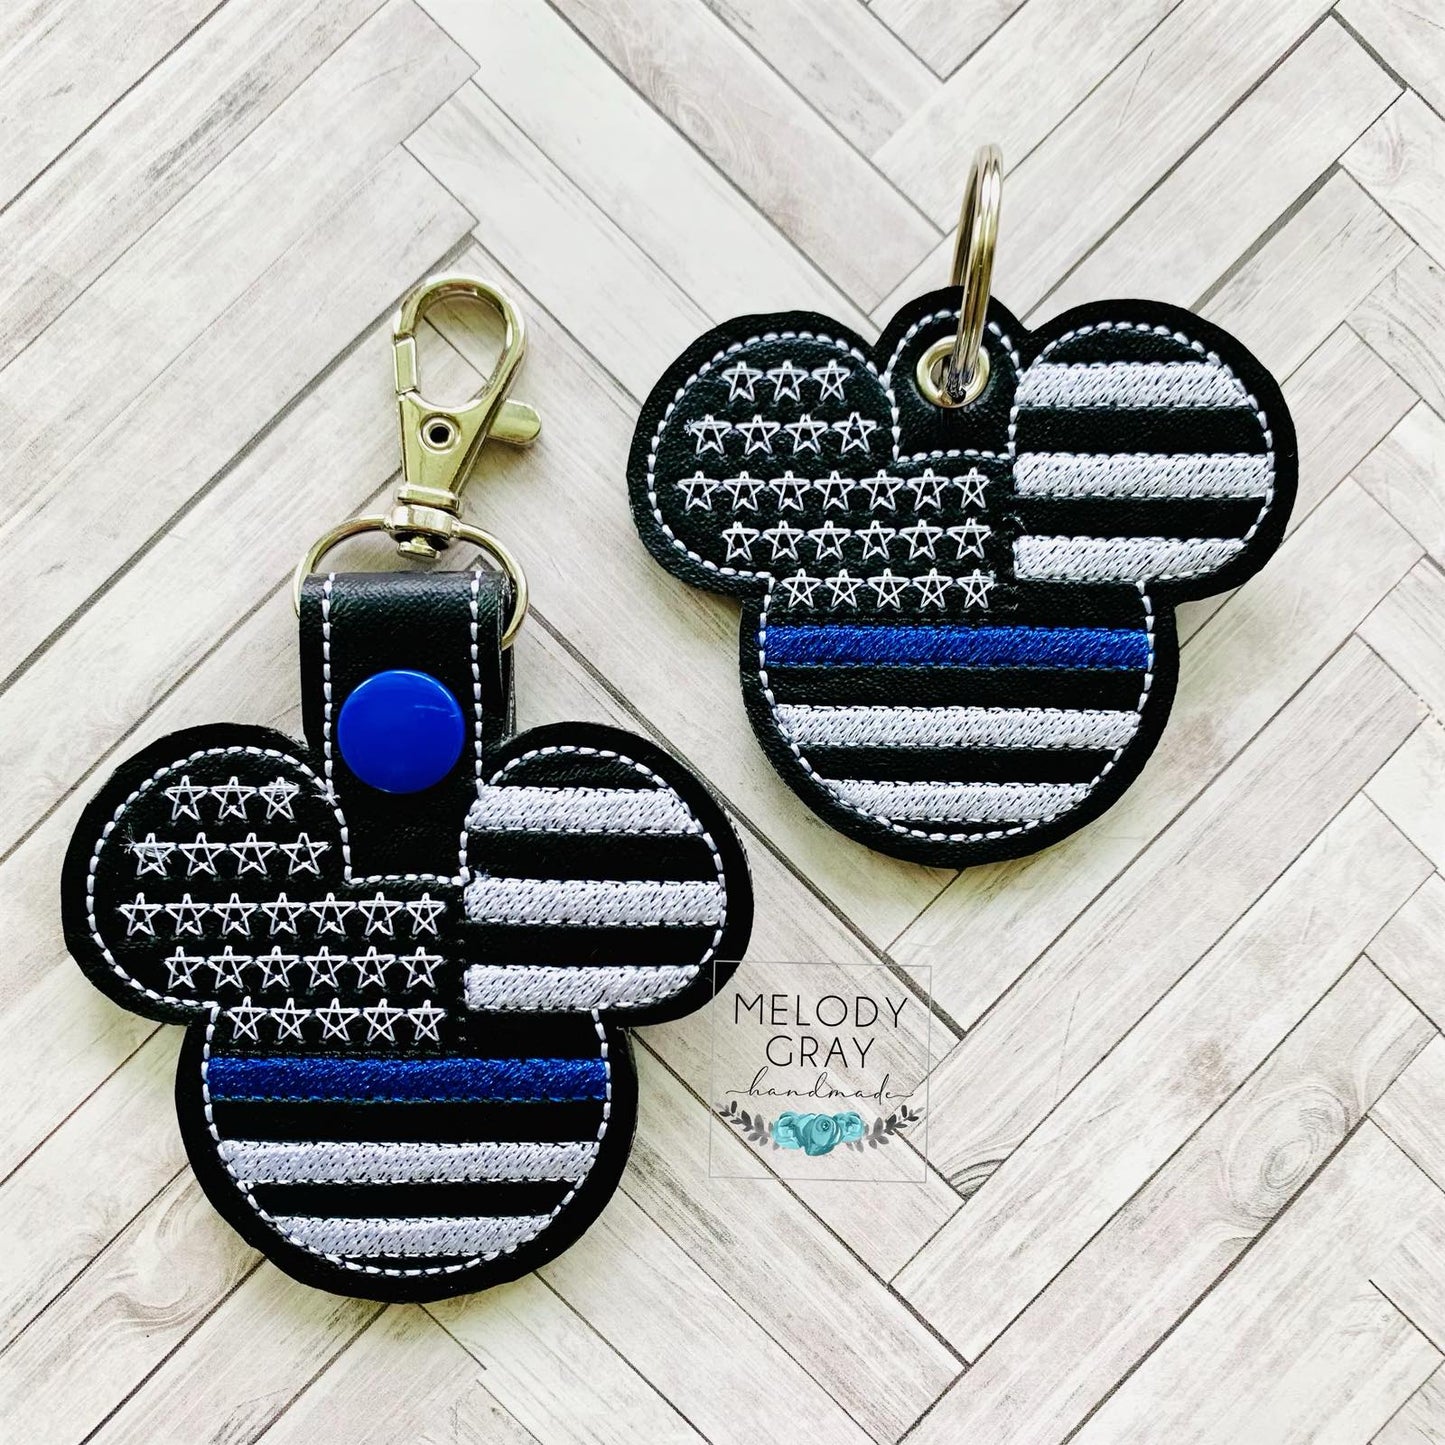 TBL Mouse Fobs - DIGITAL Embroidery DESIGN